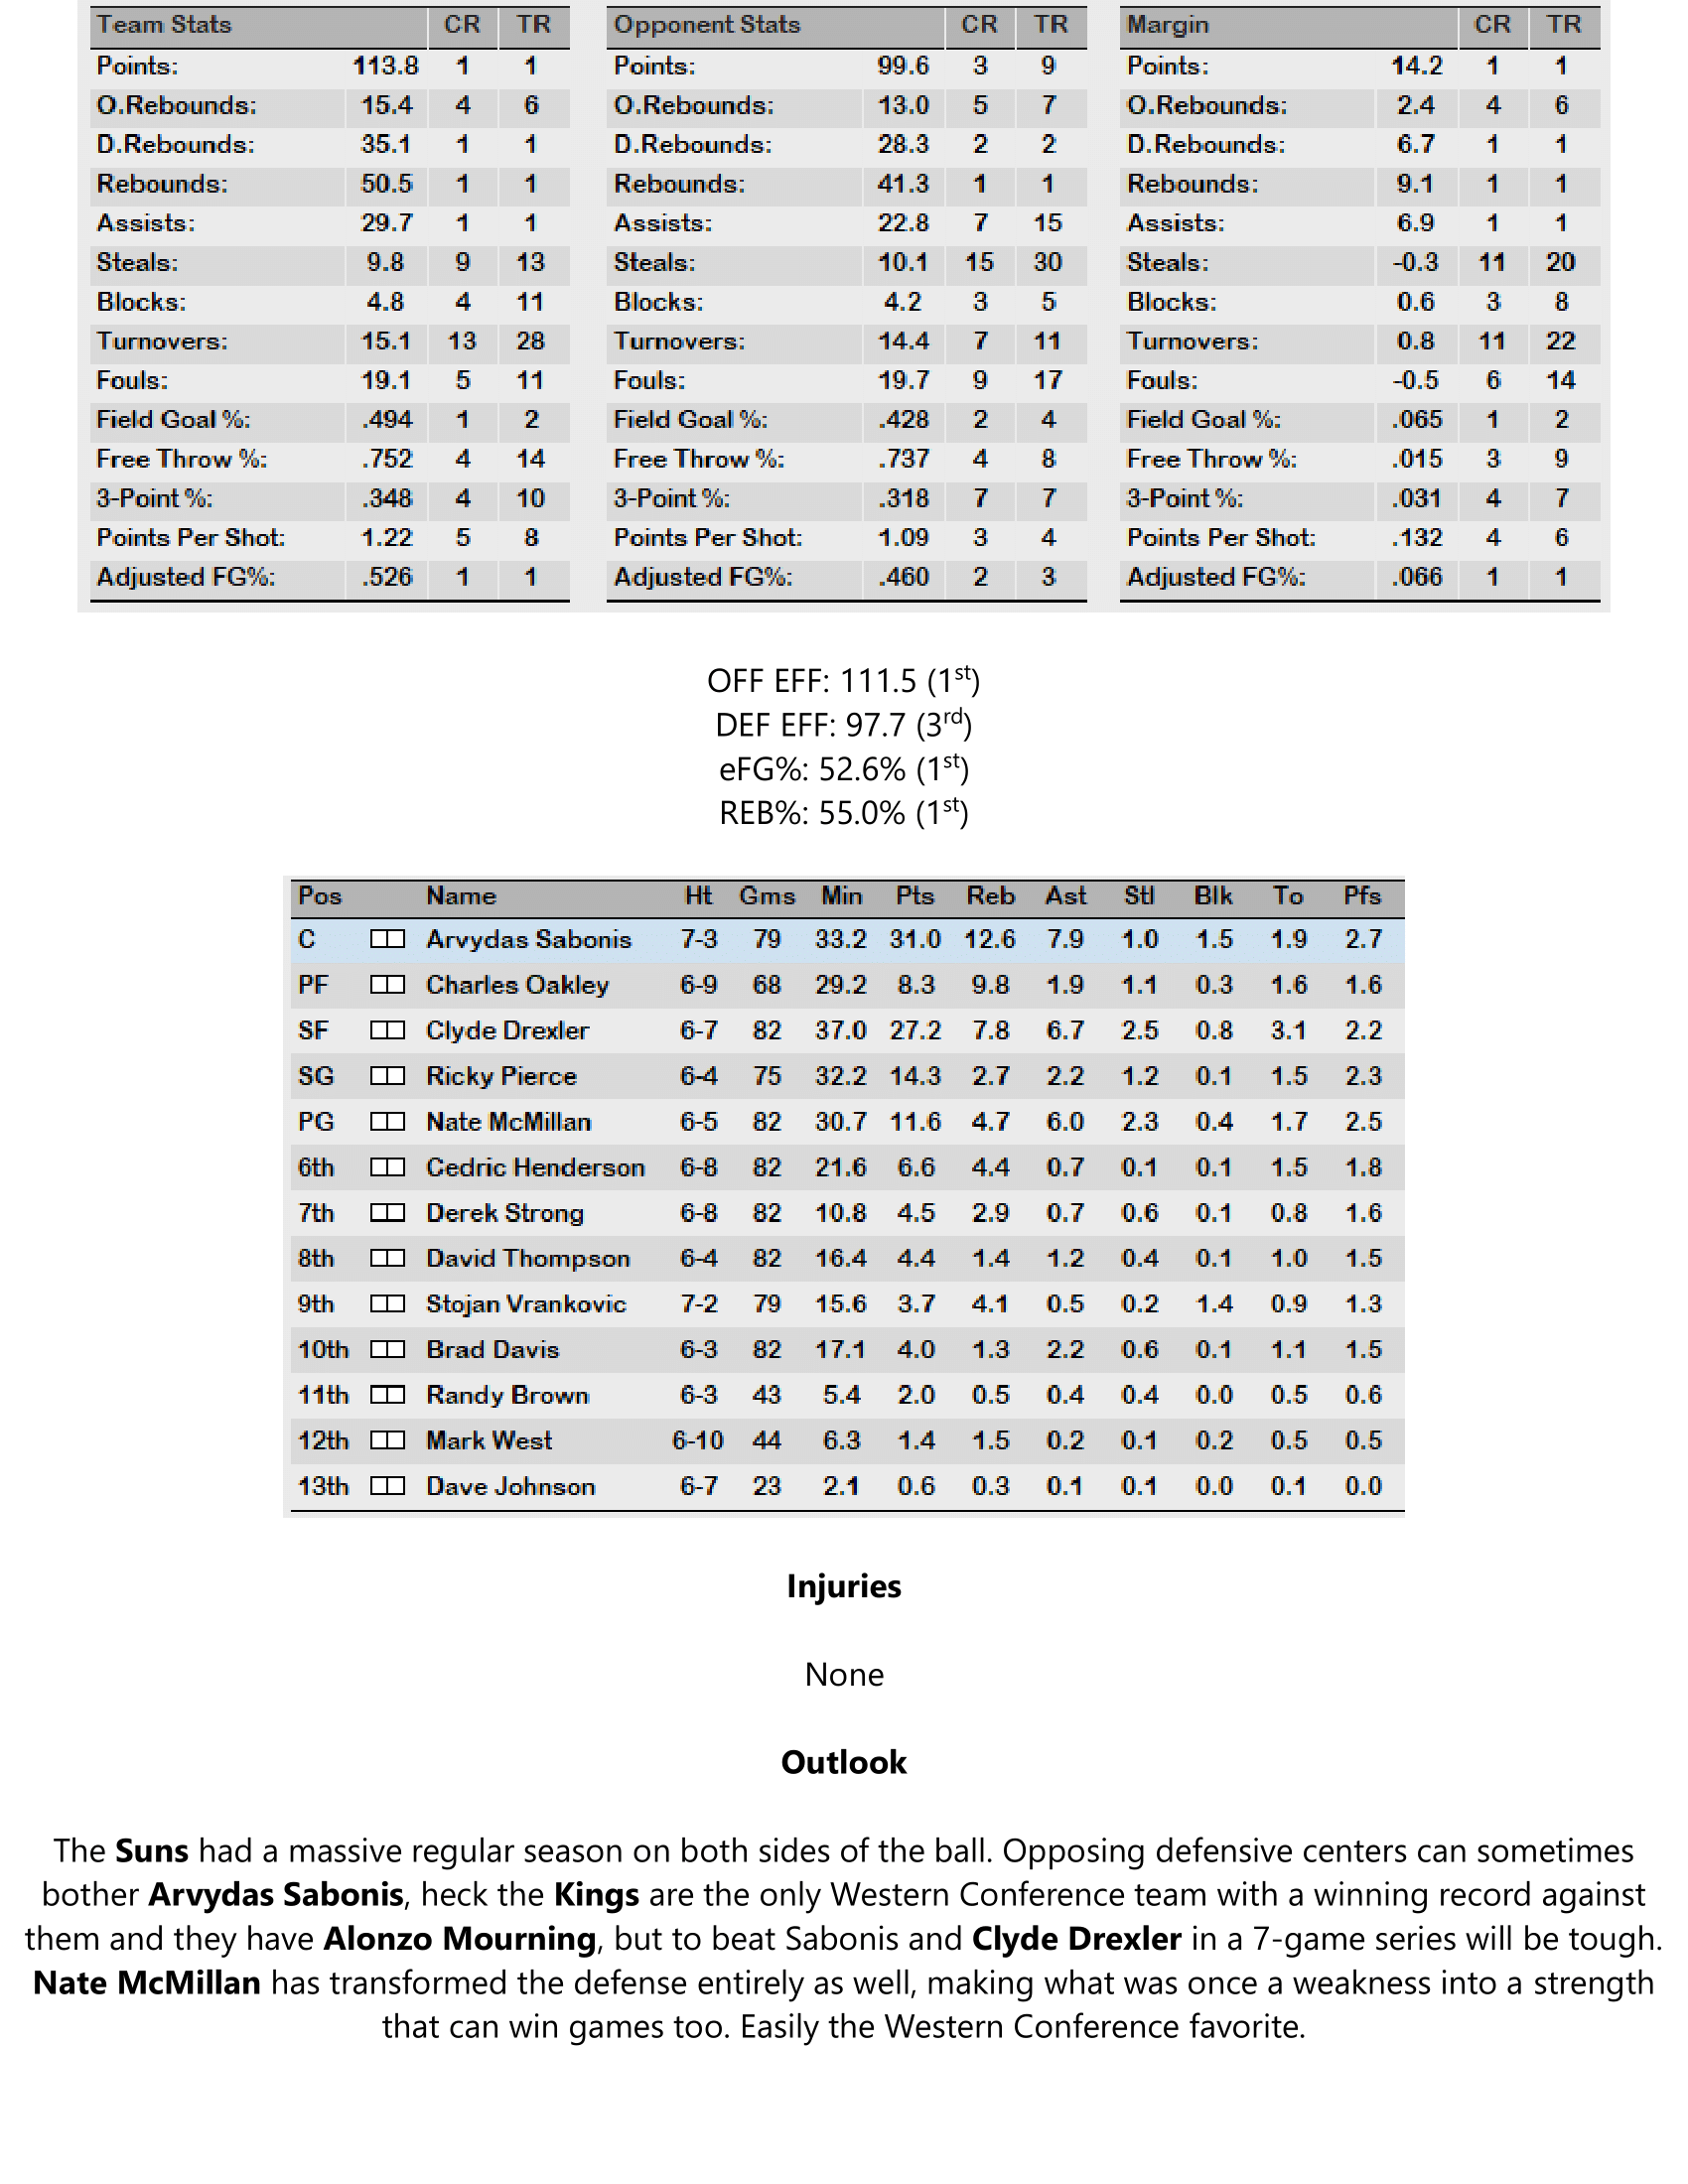 92-93-Part-4-Playoff-Preview-02.png